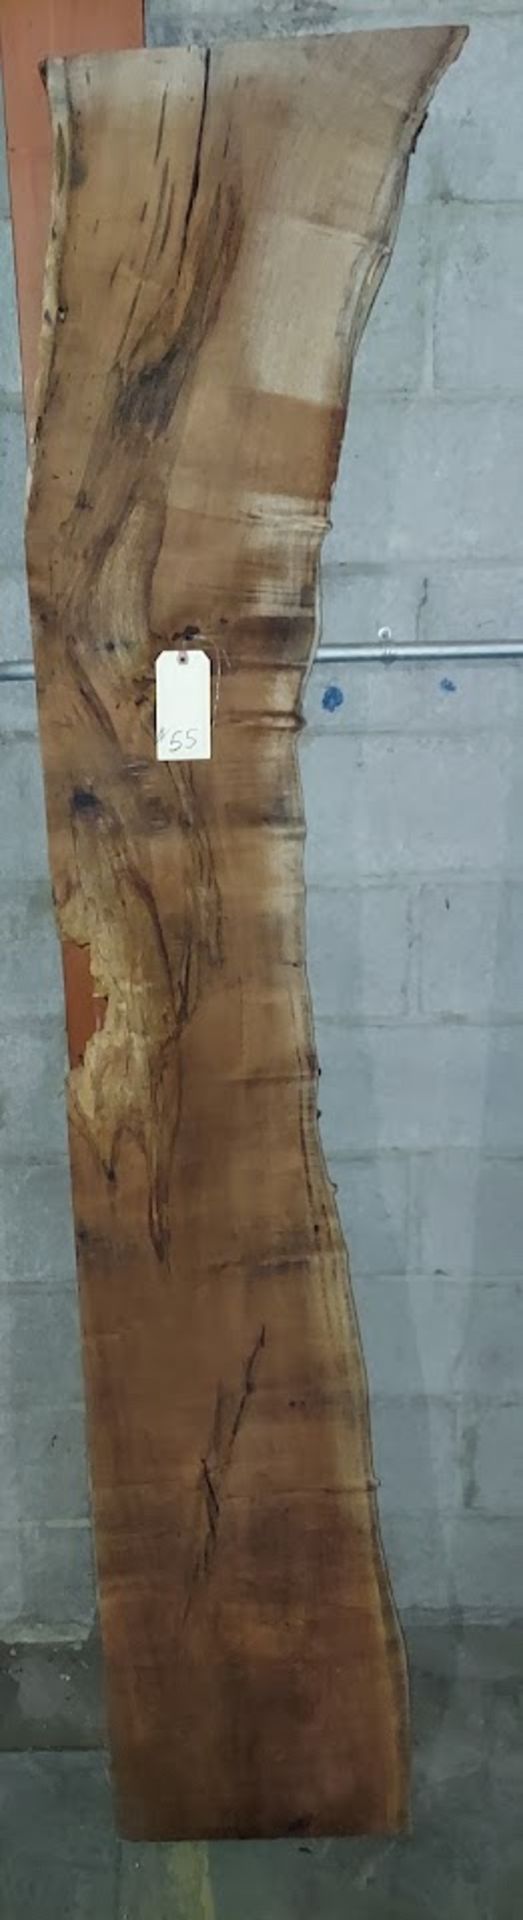 Mesquite Hardwood Lumber Slab, Size is approx. 84" x 12"-15" x 2"